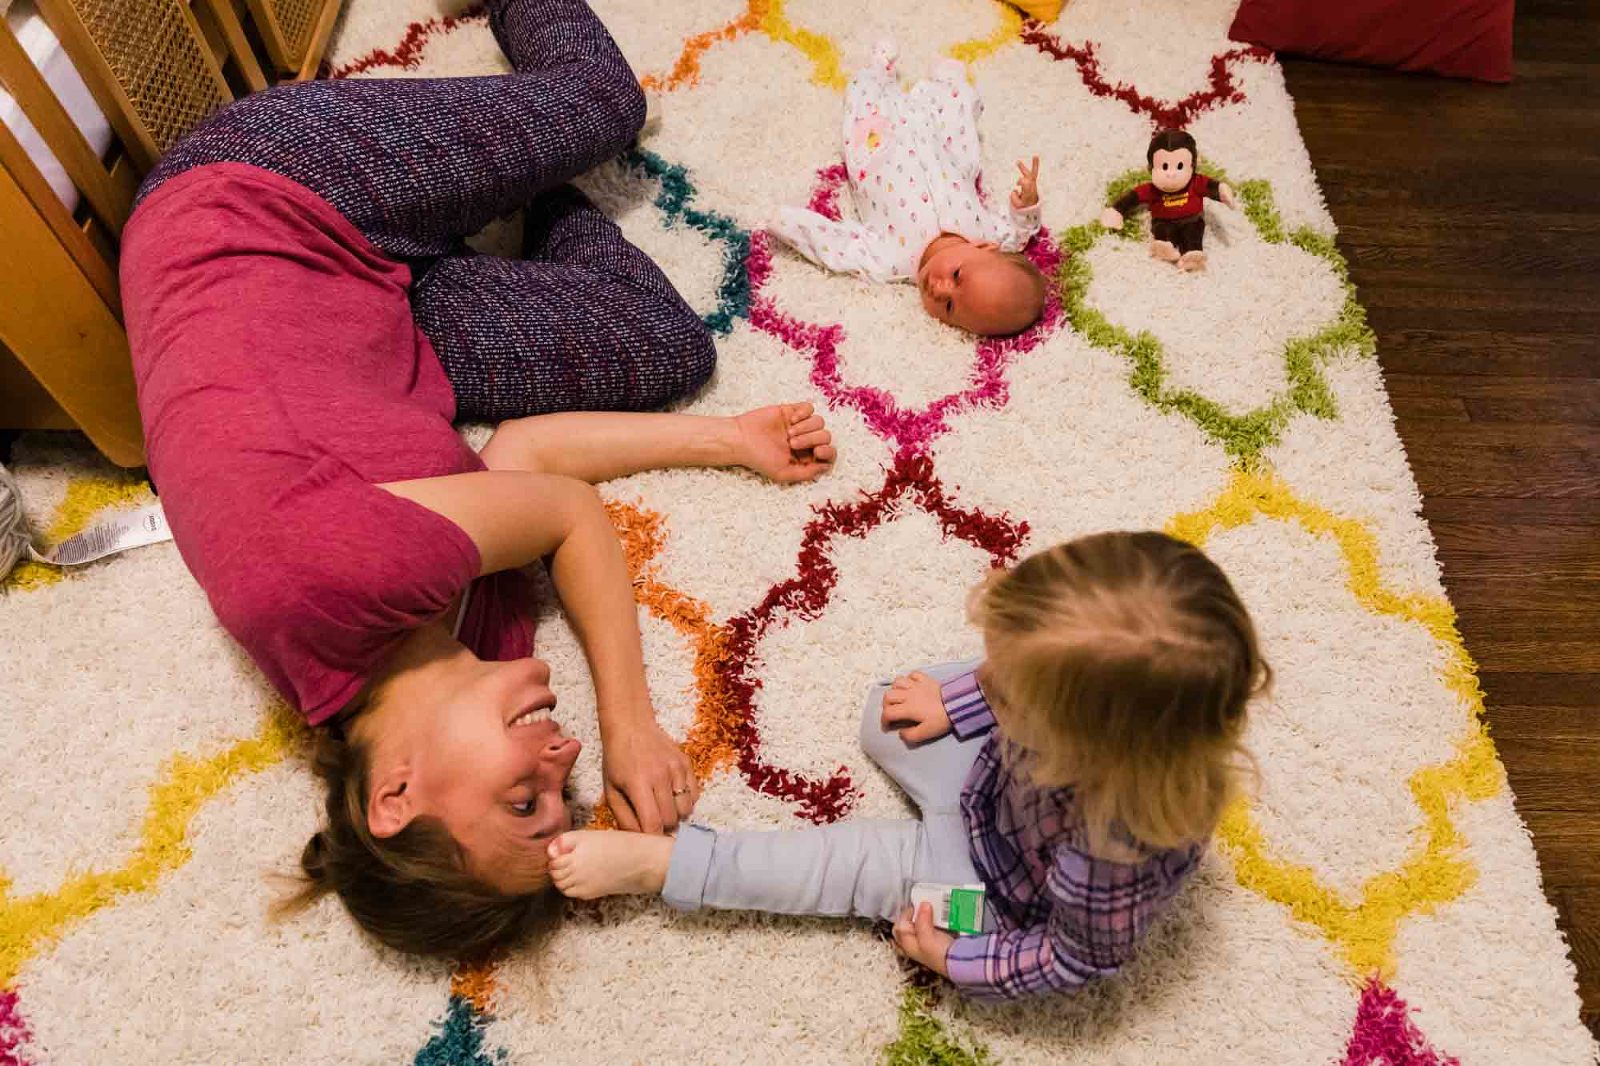 little girl pushes her foot into her mom's head as mom lies on the carpet. baby lies nearby. photo taken from above. 